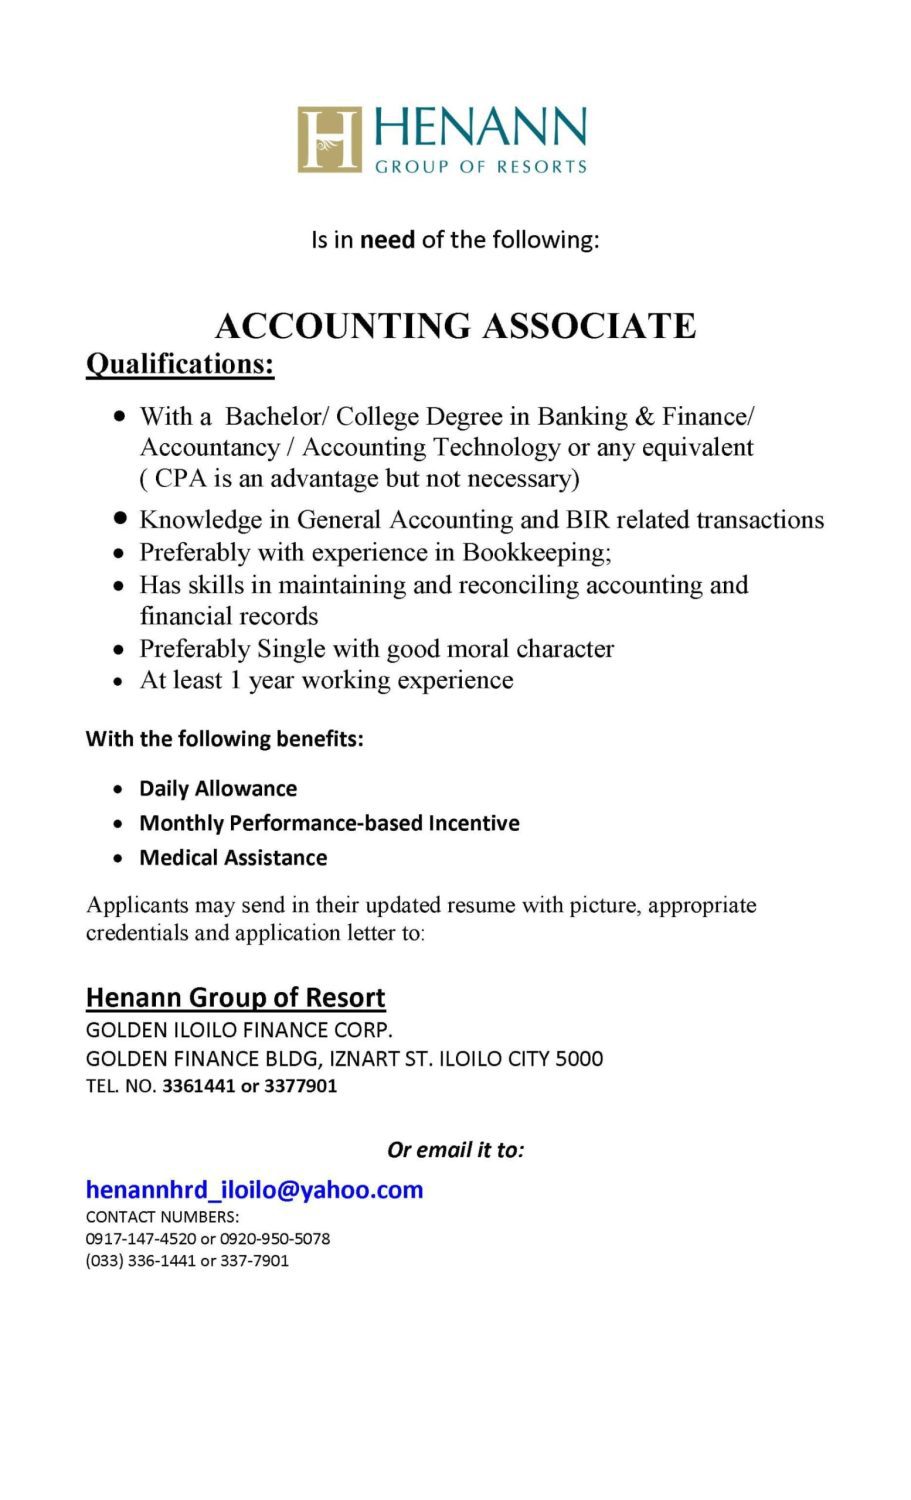 Accounting Associate Henan scaled